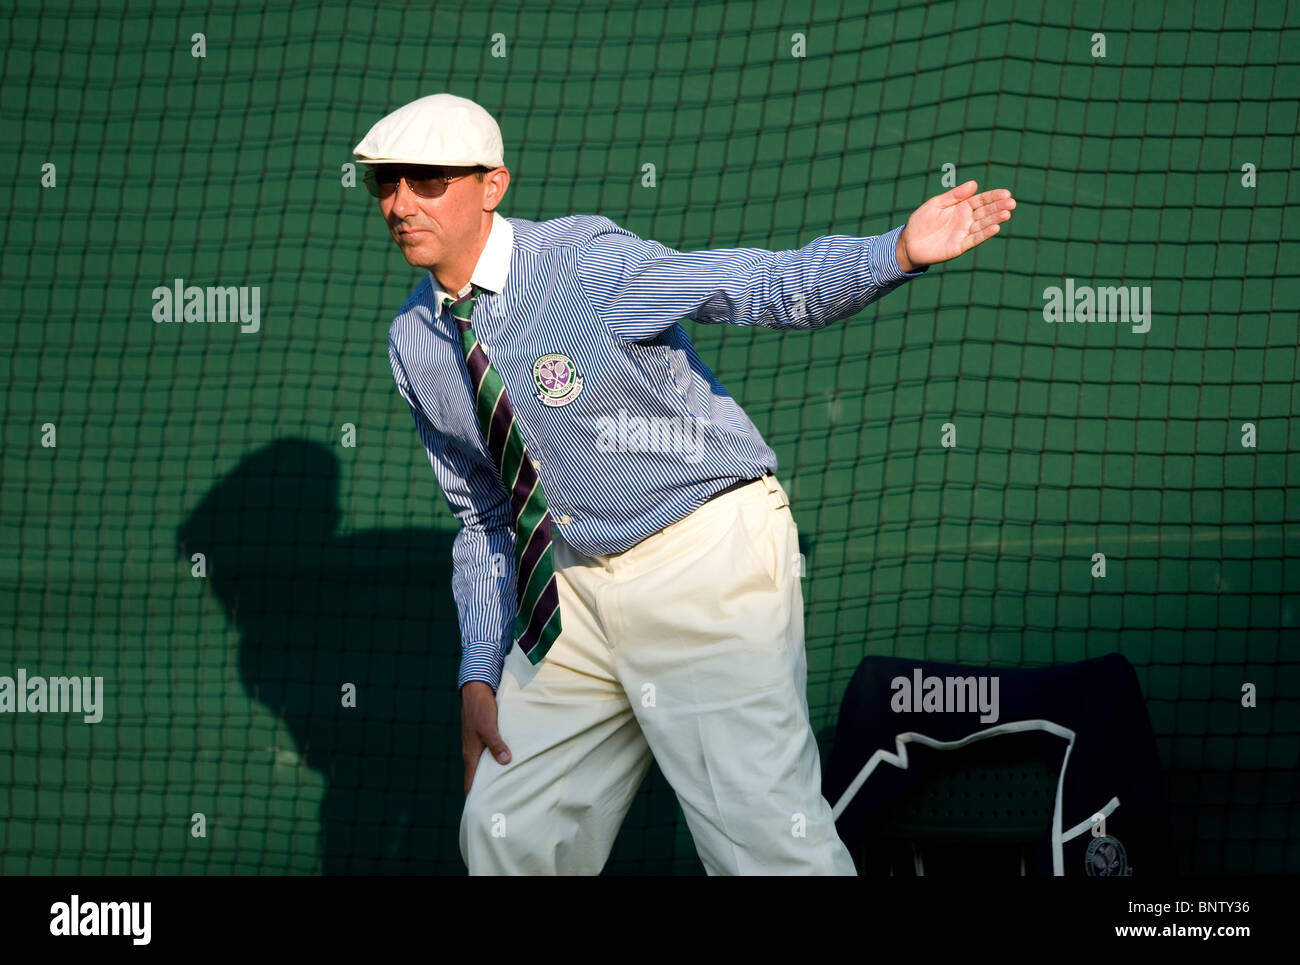 Line judge on court 1 in action during the Wimbledon Tennis Championships  2010 Stock Photo - Alamy